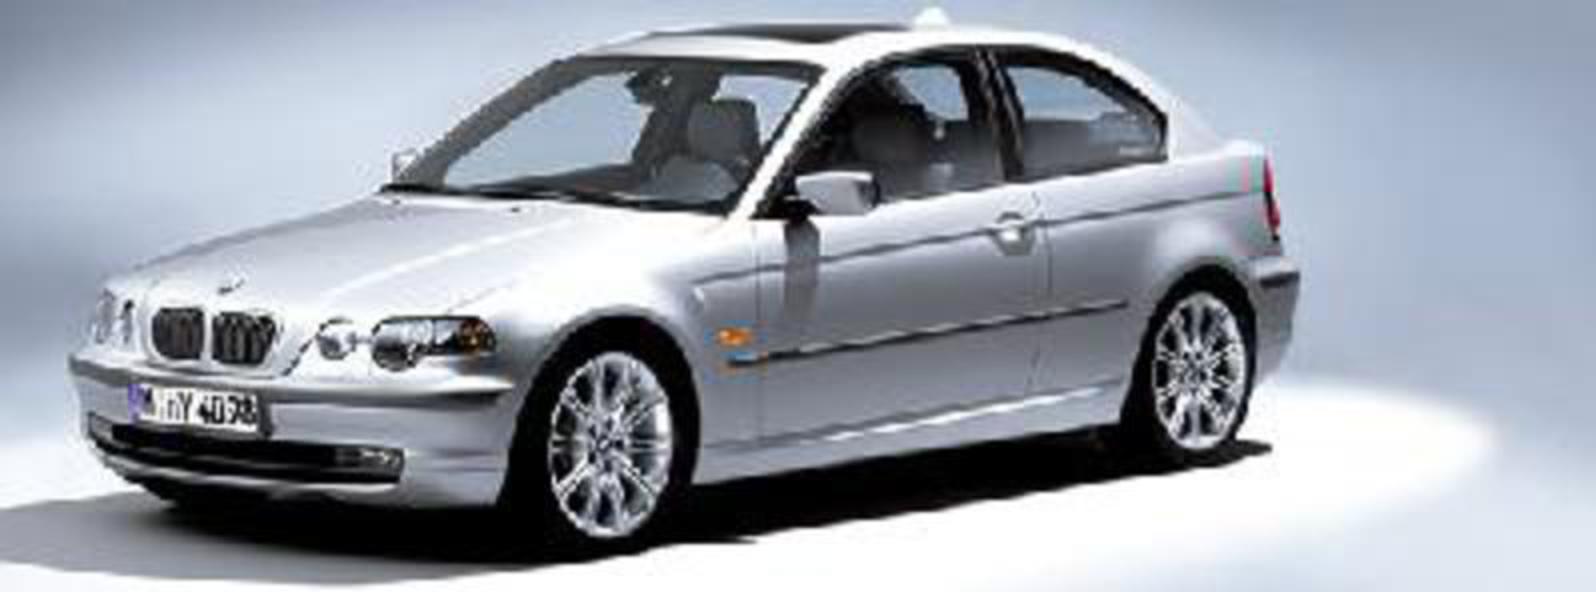 Send us more 2005 BMW 316ti Compact pictures.